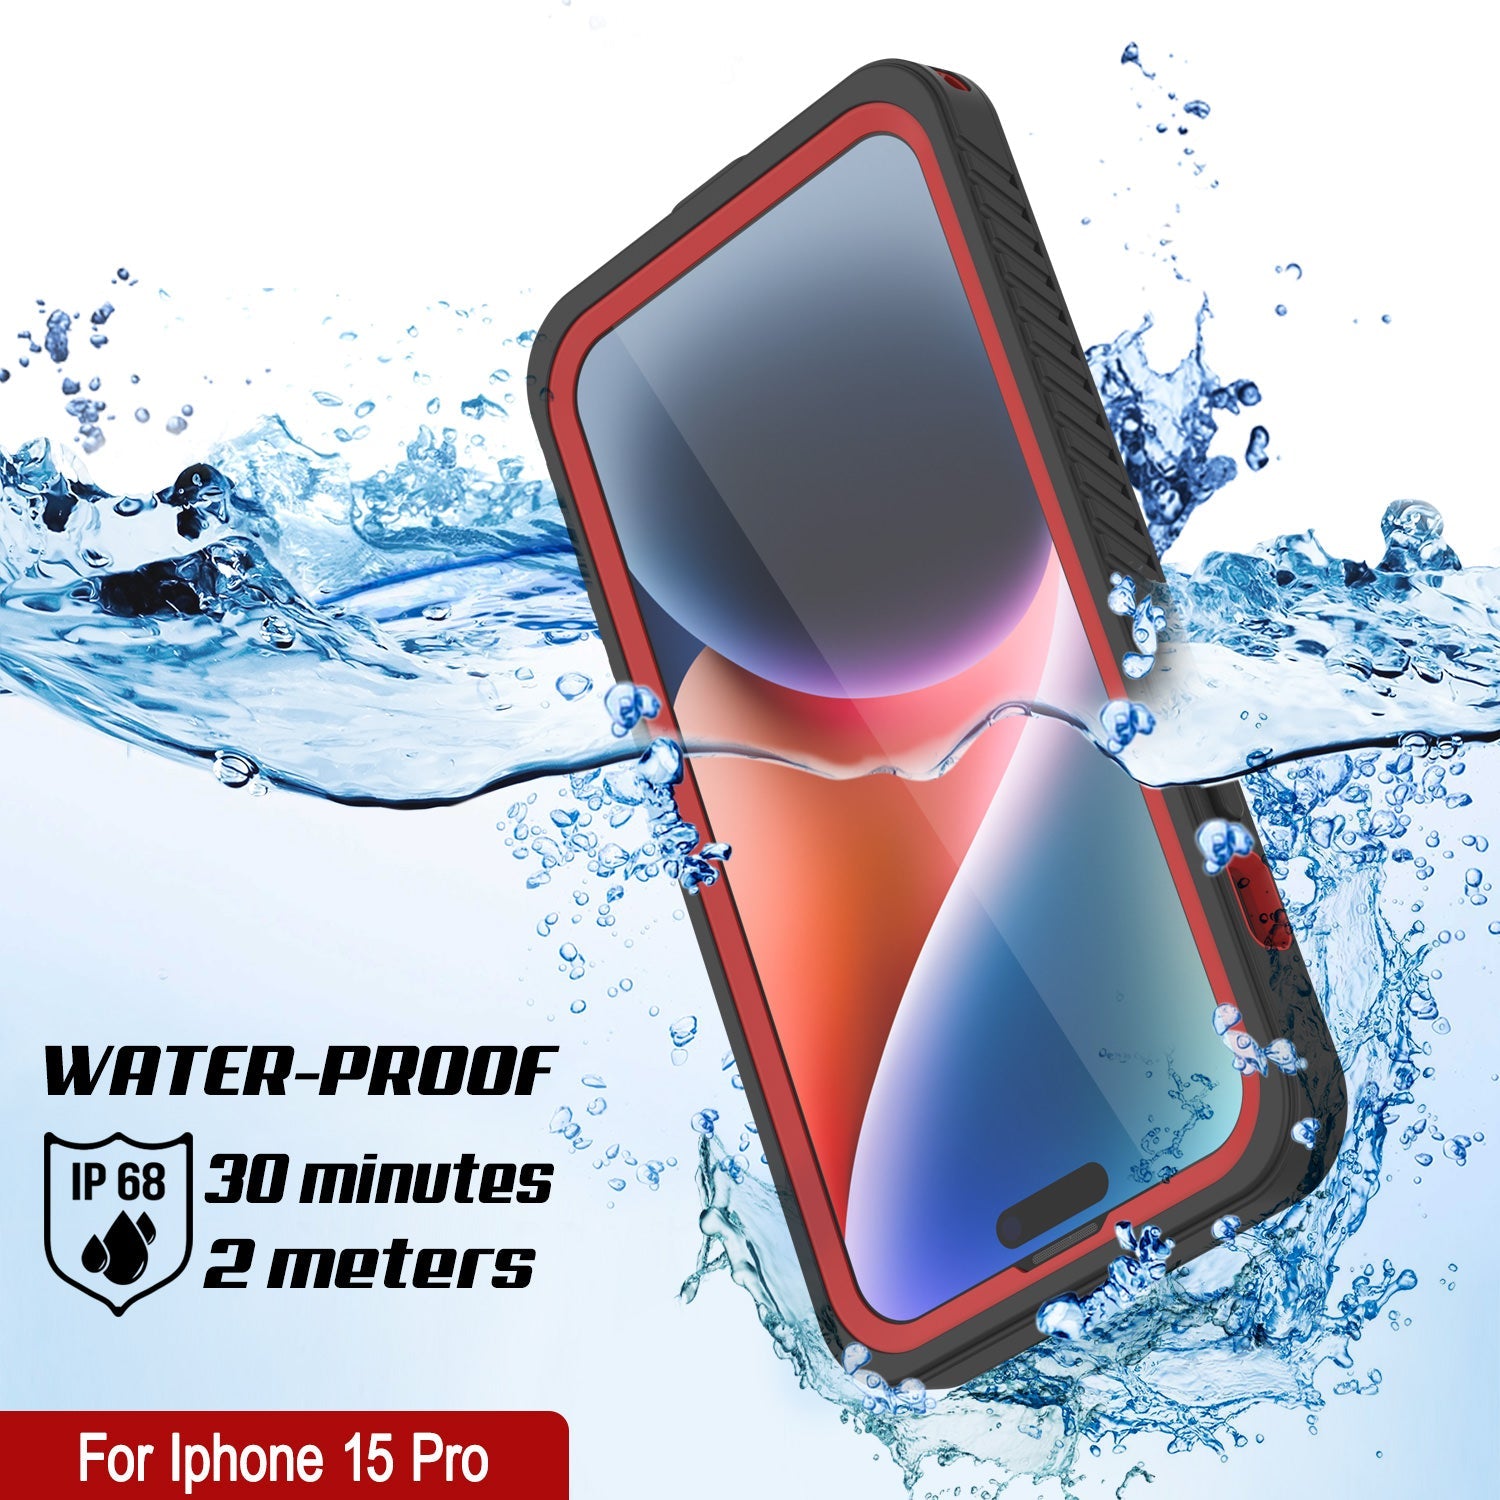 iPhone 15 Pro Waterproof Case, Punkcase [Extreme Series] Armor Cover W/ Built In Screen Protector [Red]